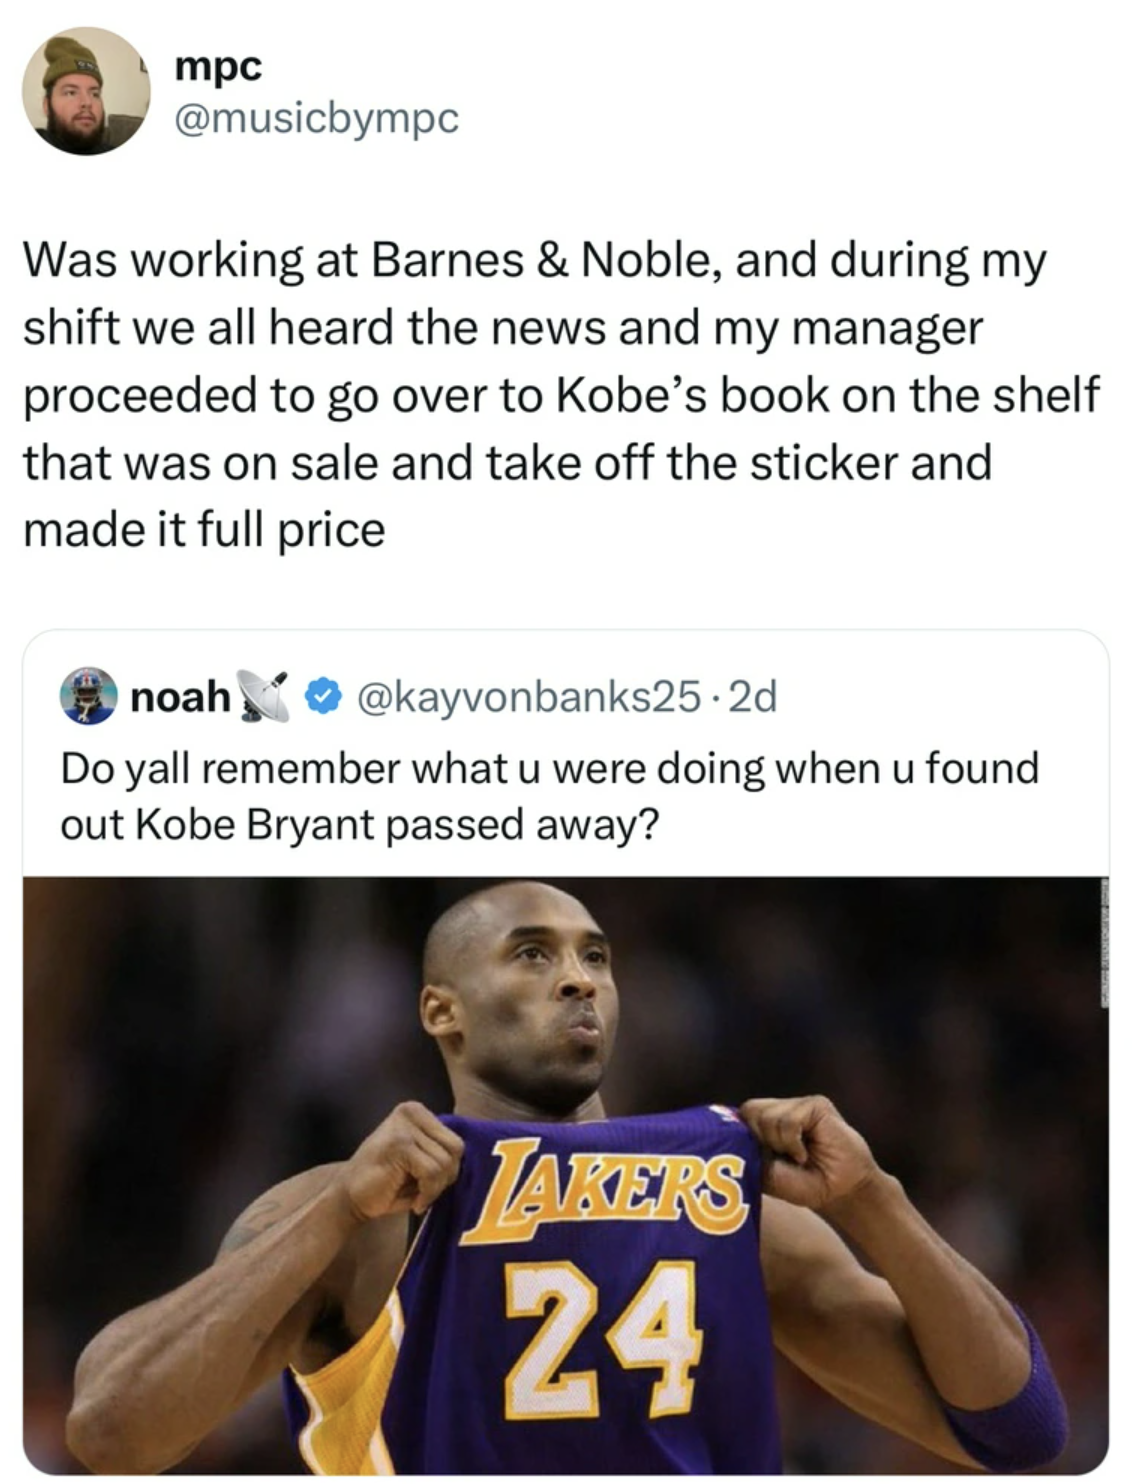 player - mpc Was working at Barnes & Noble, and during my shift we all heard the news and my manager proceeded to go over to Kobe's book on the shelf that was on sale and take off the sticker and made it full price noah .2d Do yall remember what u were do